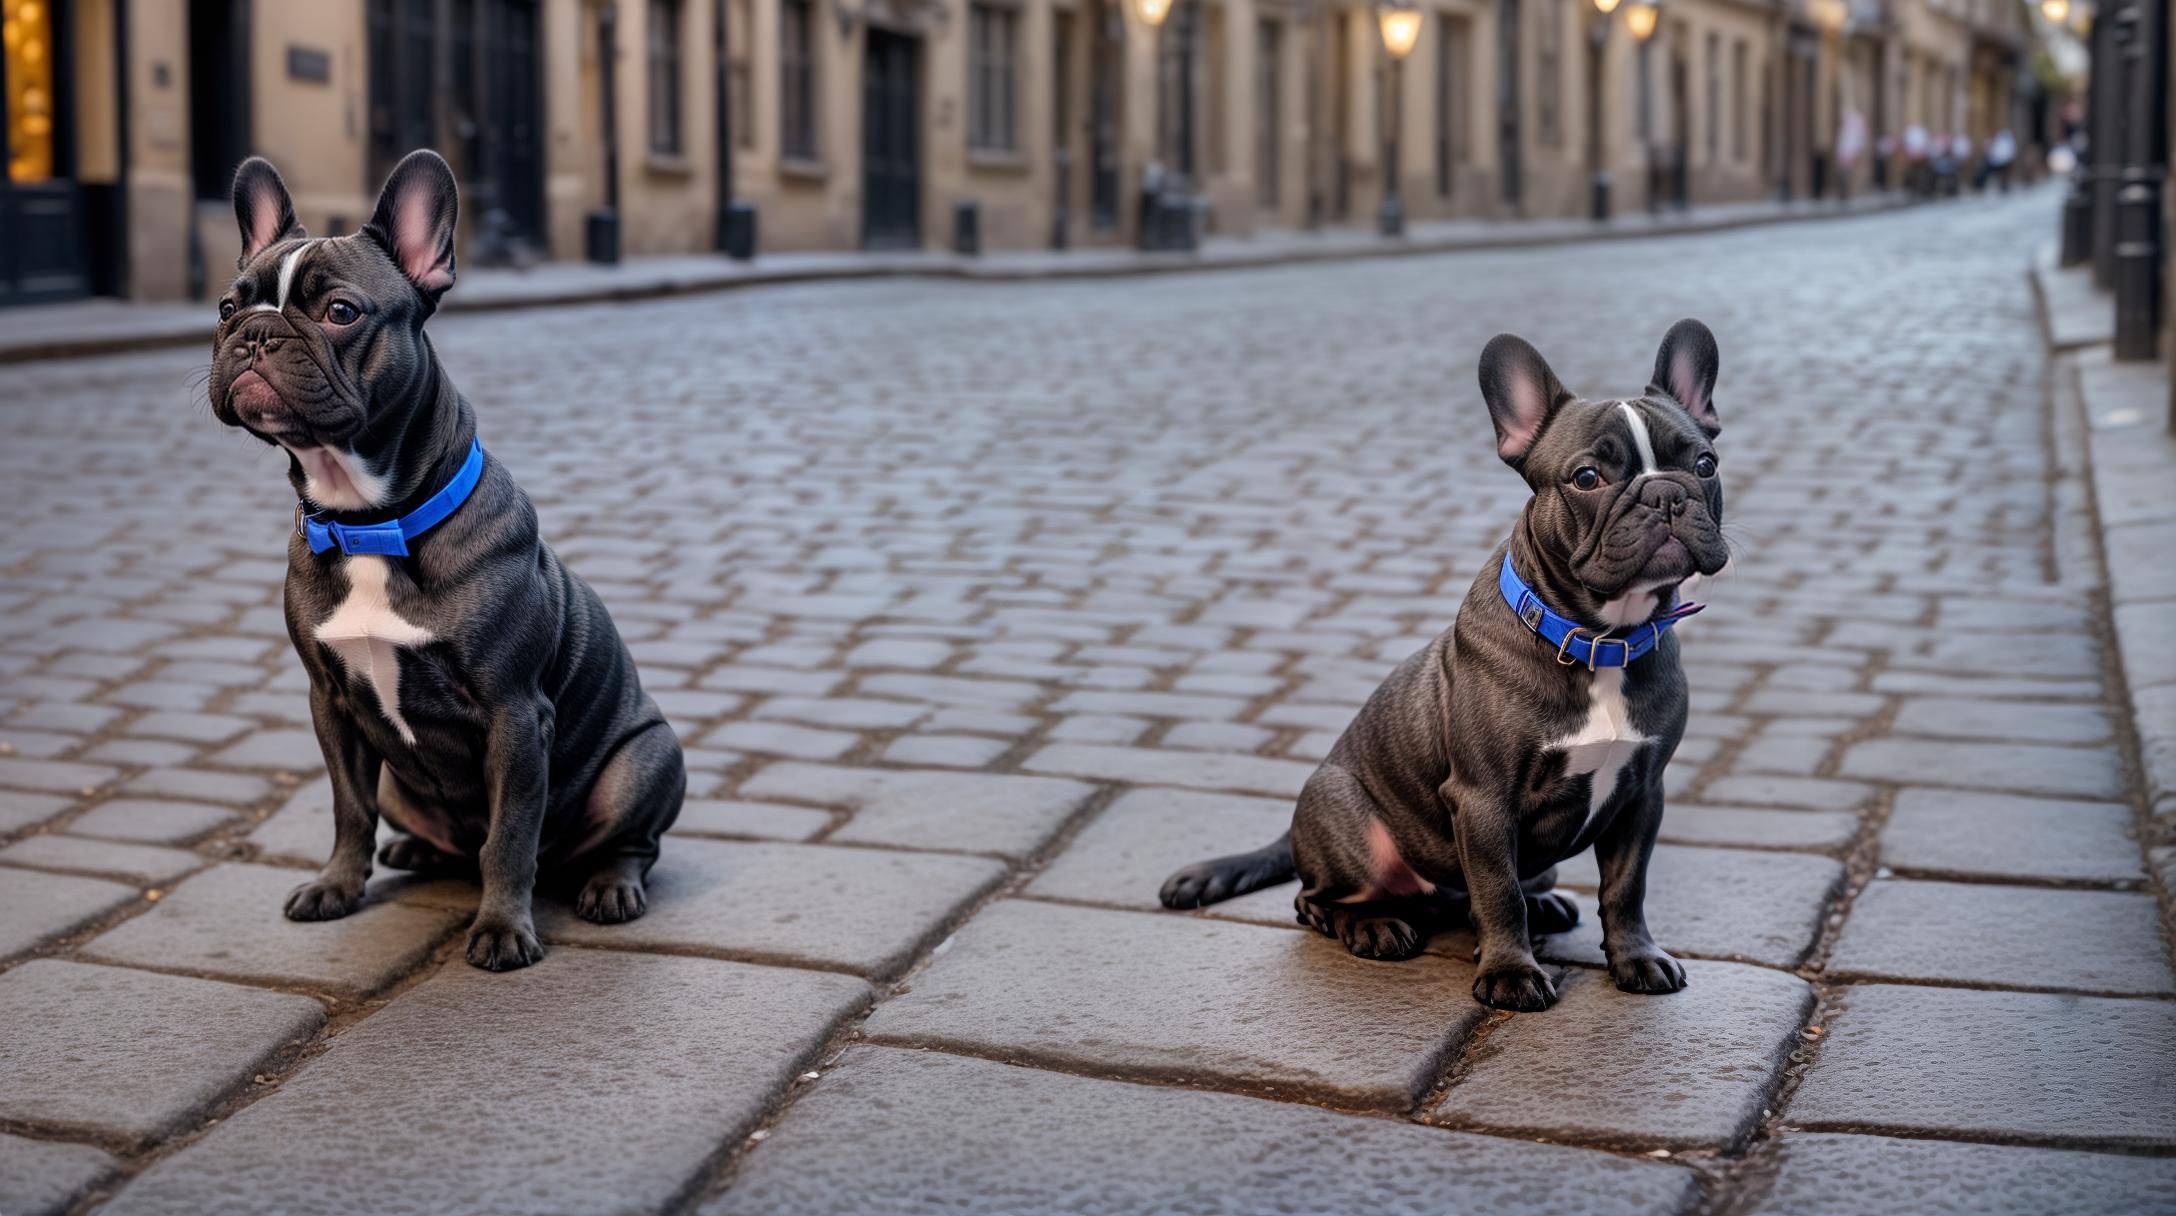  Create a realistic image of a French Bulldog in an urban setting. The dog is a compact adult with a smooth, brindle coat and the distinctive bat like ears characteristic of the breed. It is sitting confidently on a cobblestone street in a quaint city neighborhood, with small cafes and boutiques lining the sidewalks. Nearby, a classic street lamp casts a soft light, enhancing the twilight ambiance. The French Bulldog is wearing a stylish, bright blue collar, looking up with an alert and curious expression, embodying the charming and adaptable nature of the breed.